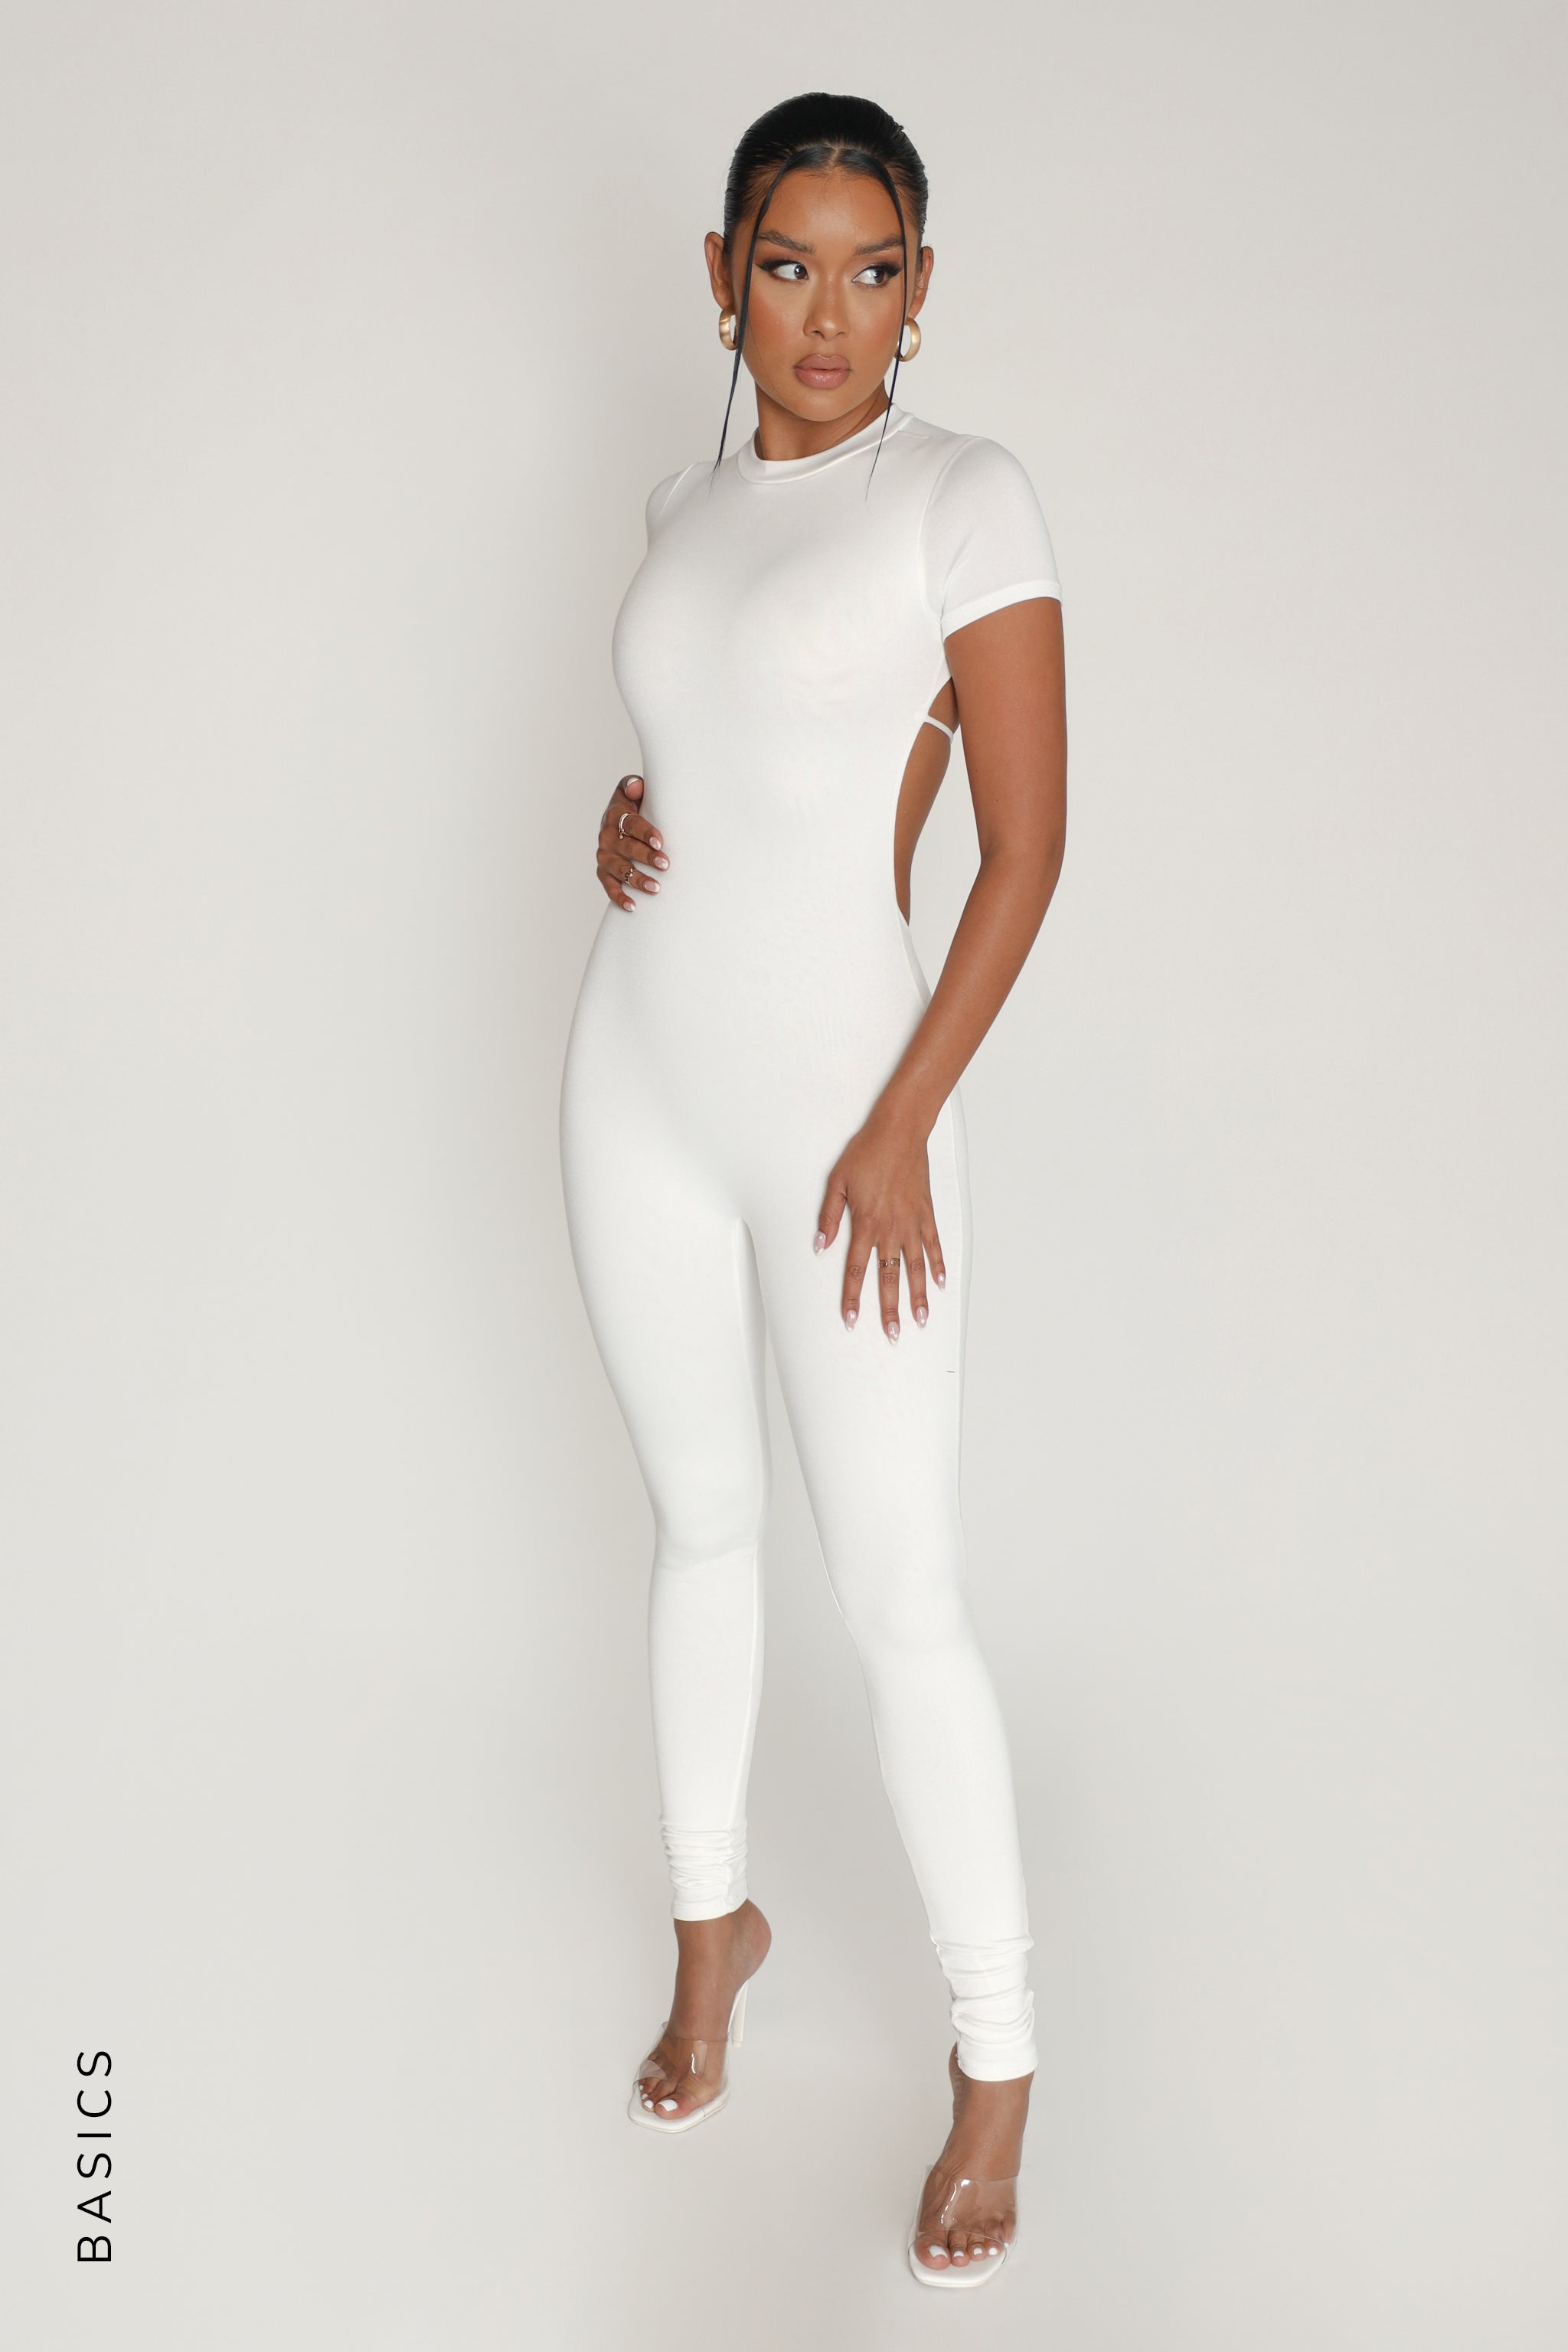 White Long Sleeve Zip up Yoga Jumpsuit Catsuit Gym Outfit - Etsy